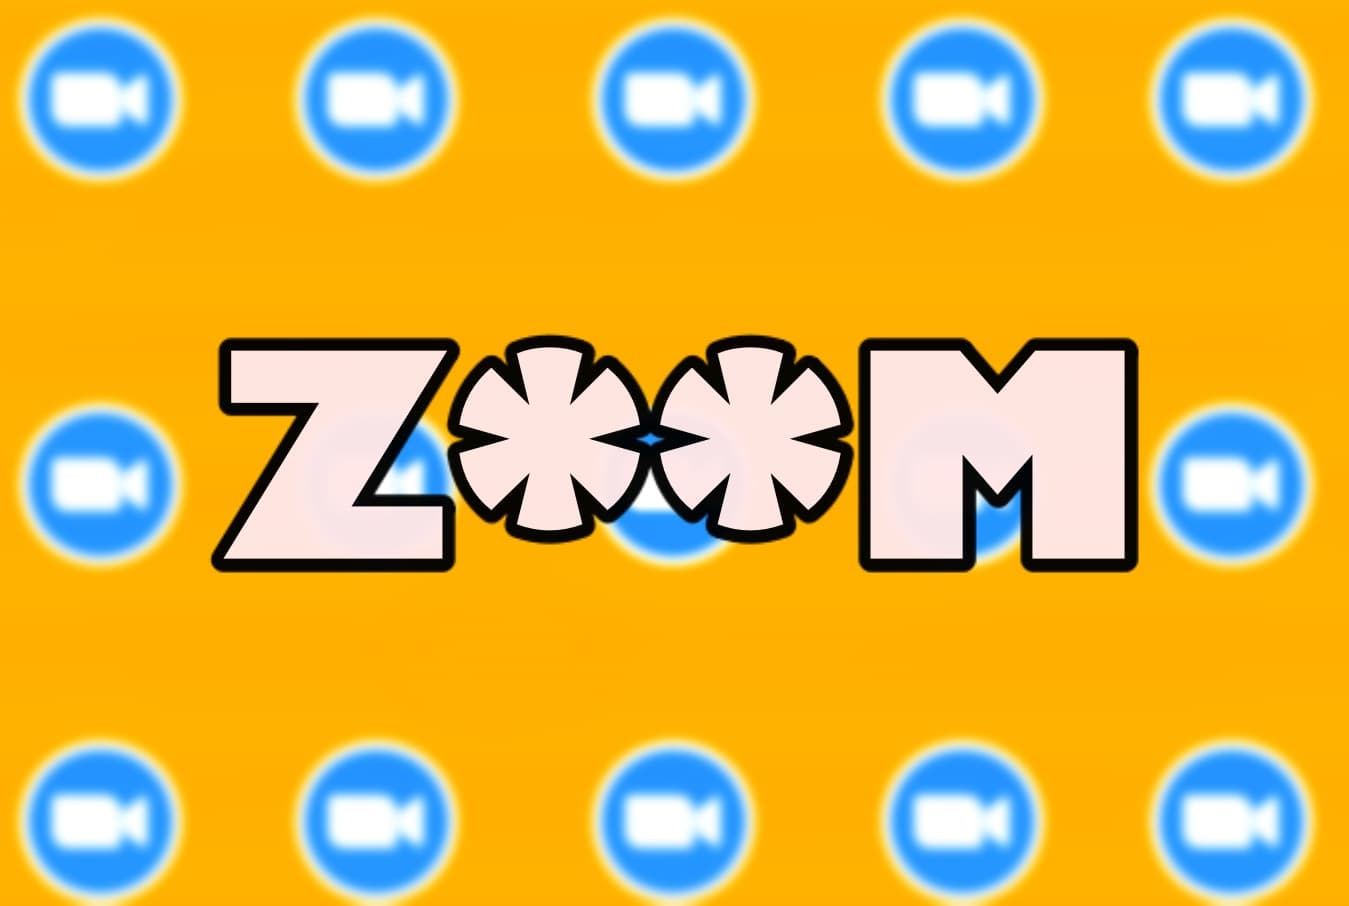 zoom-adds-two-factor-authentication-2fa-for-security